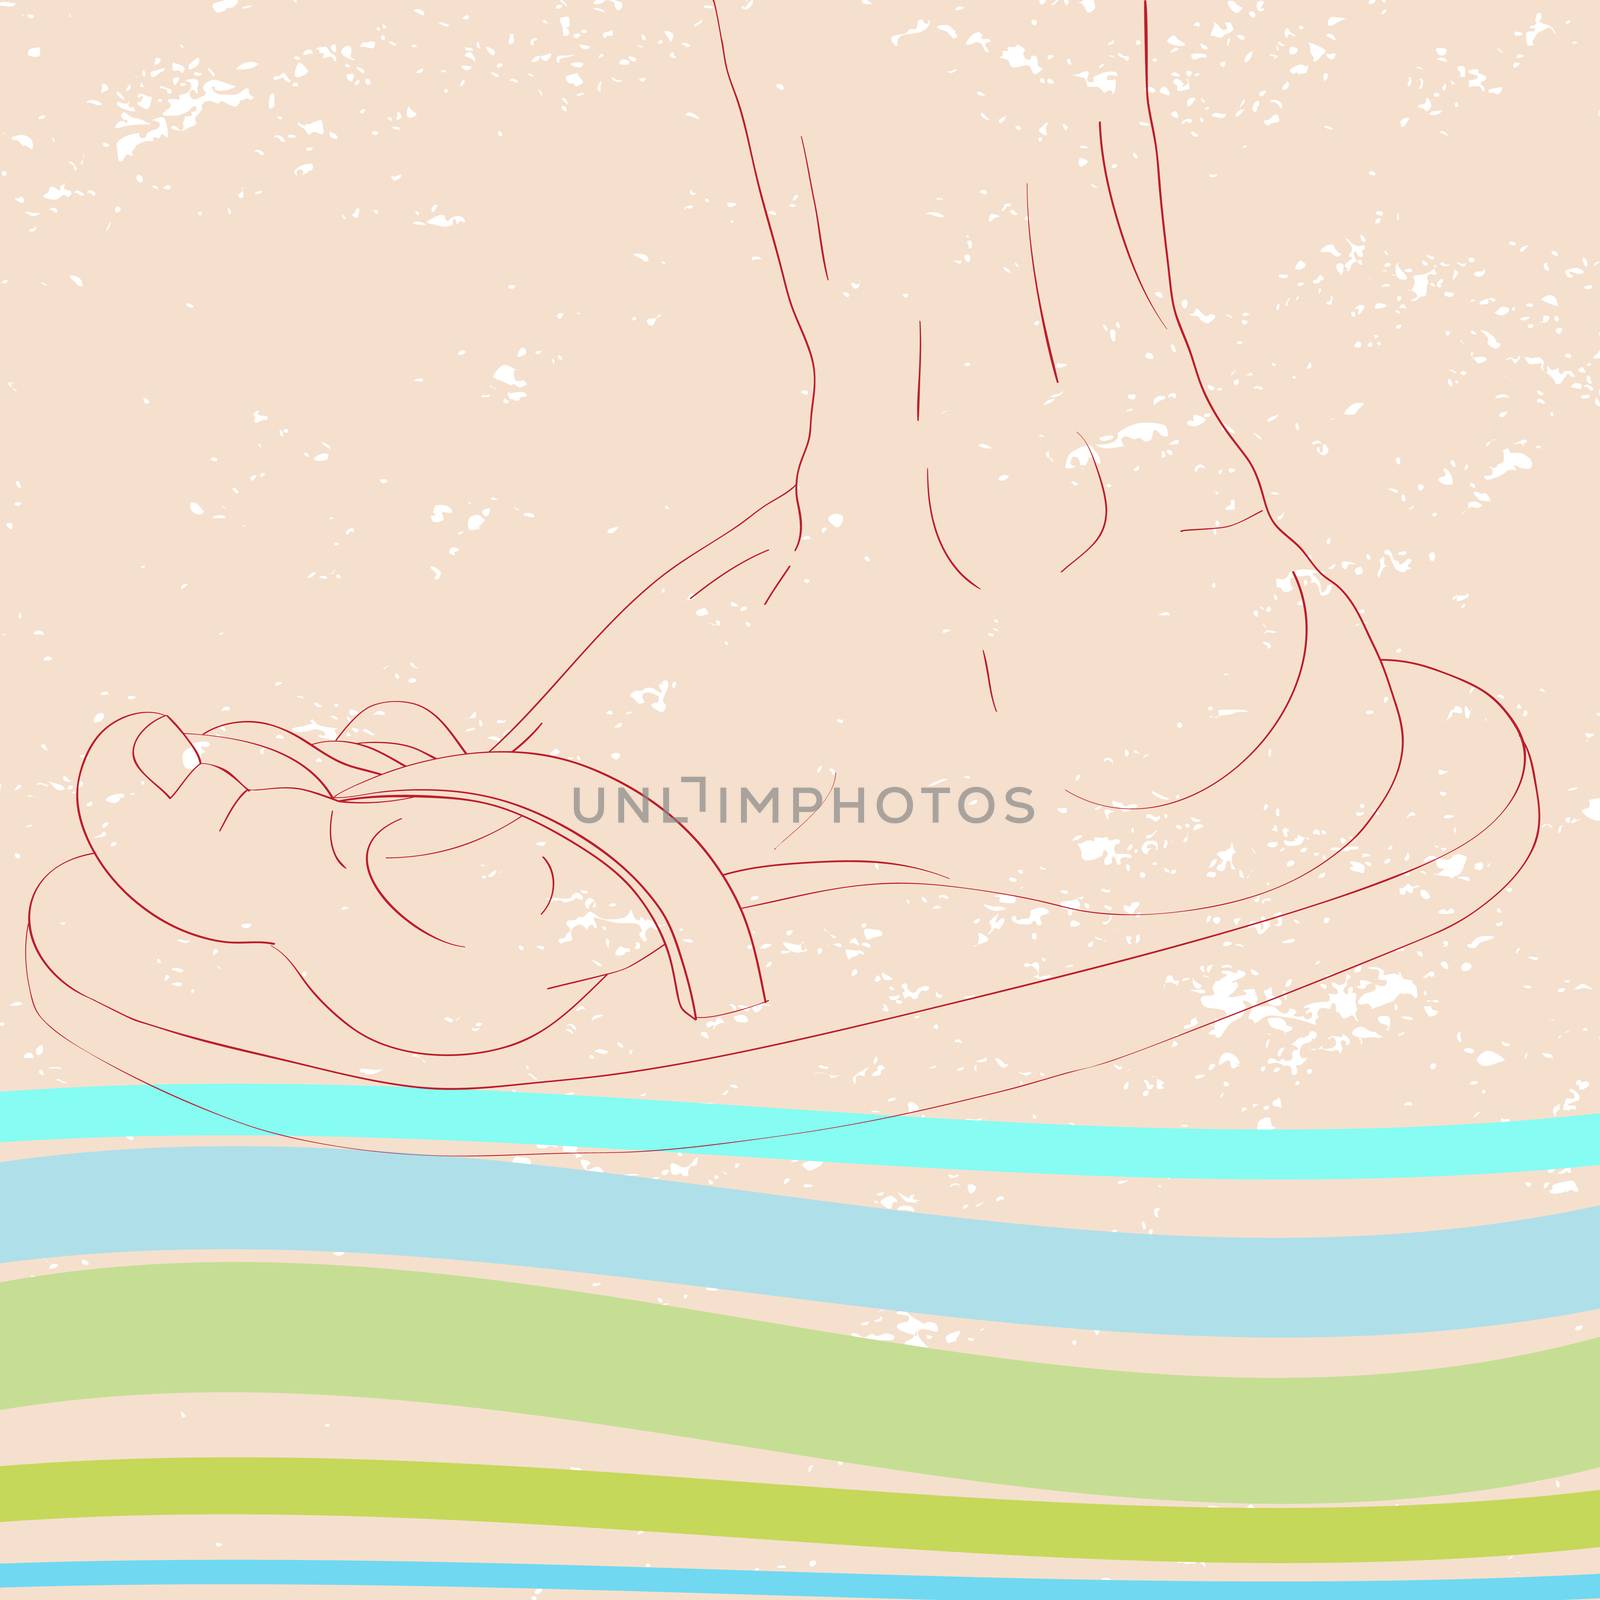 Hand drawn iilustration of a foot profile with flip flops over a grungy sand background